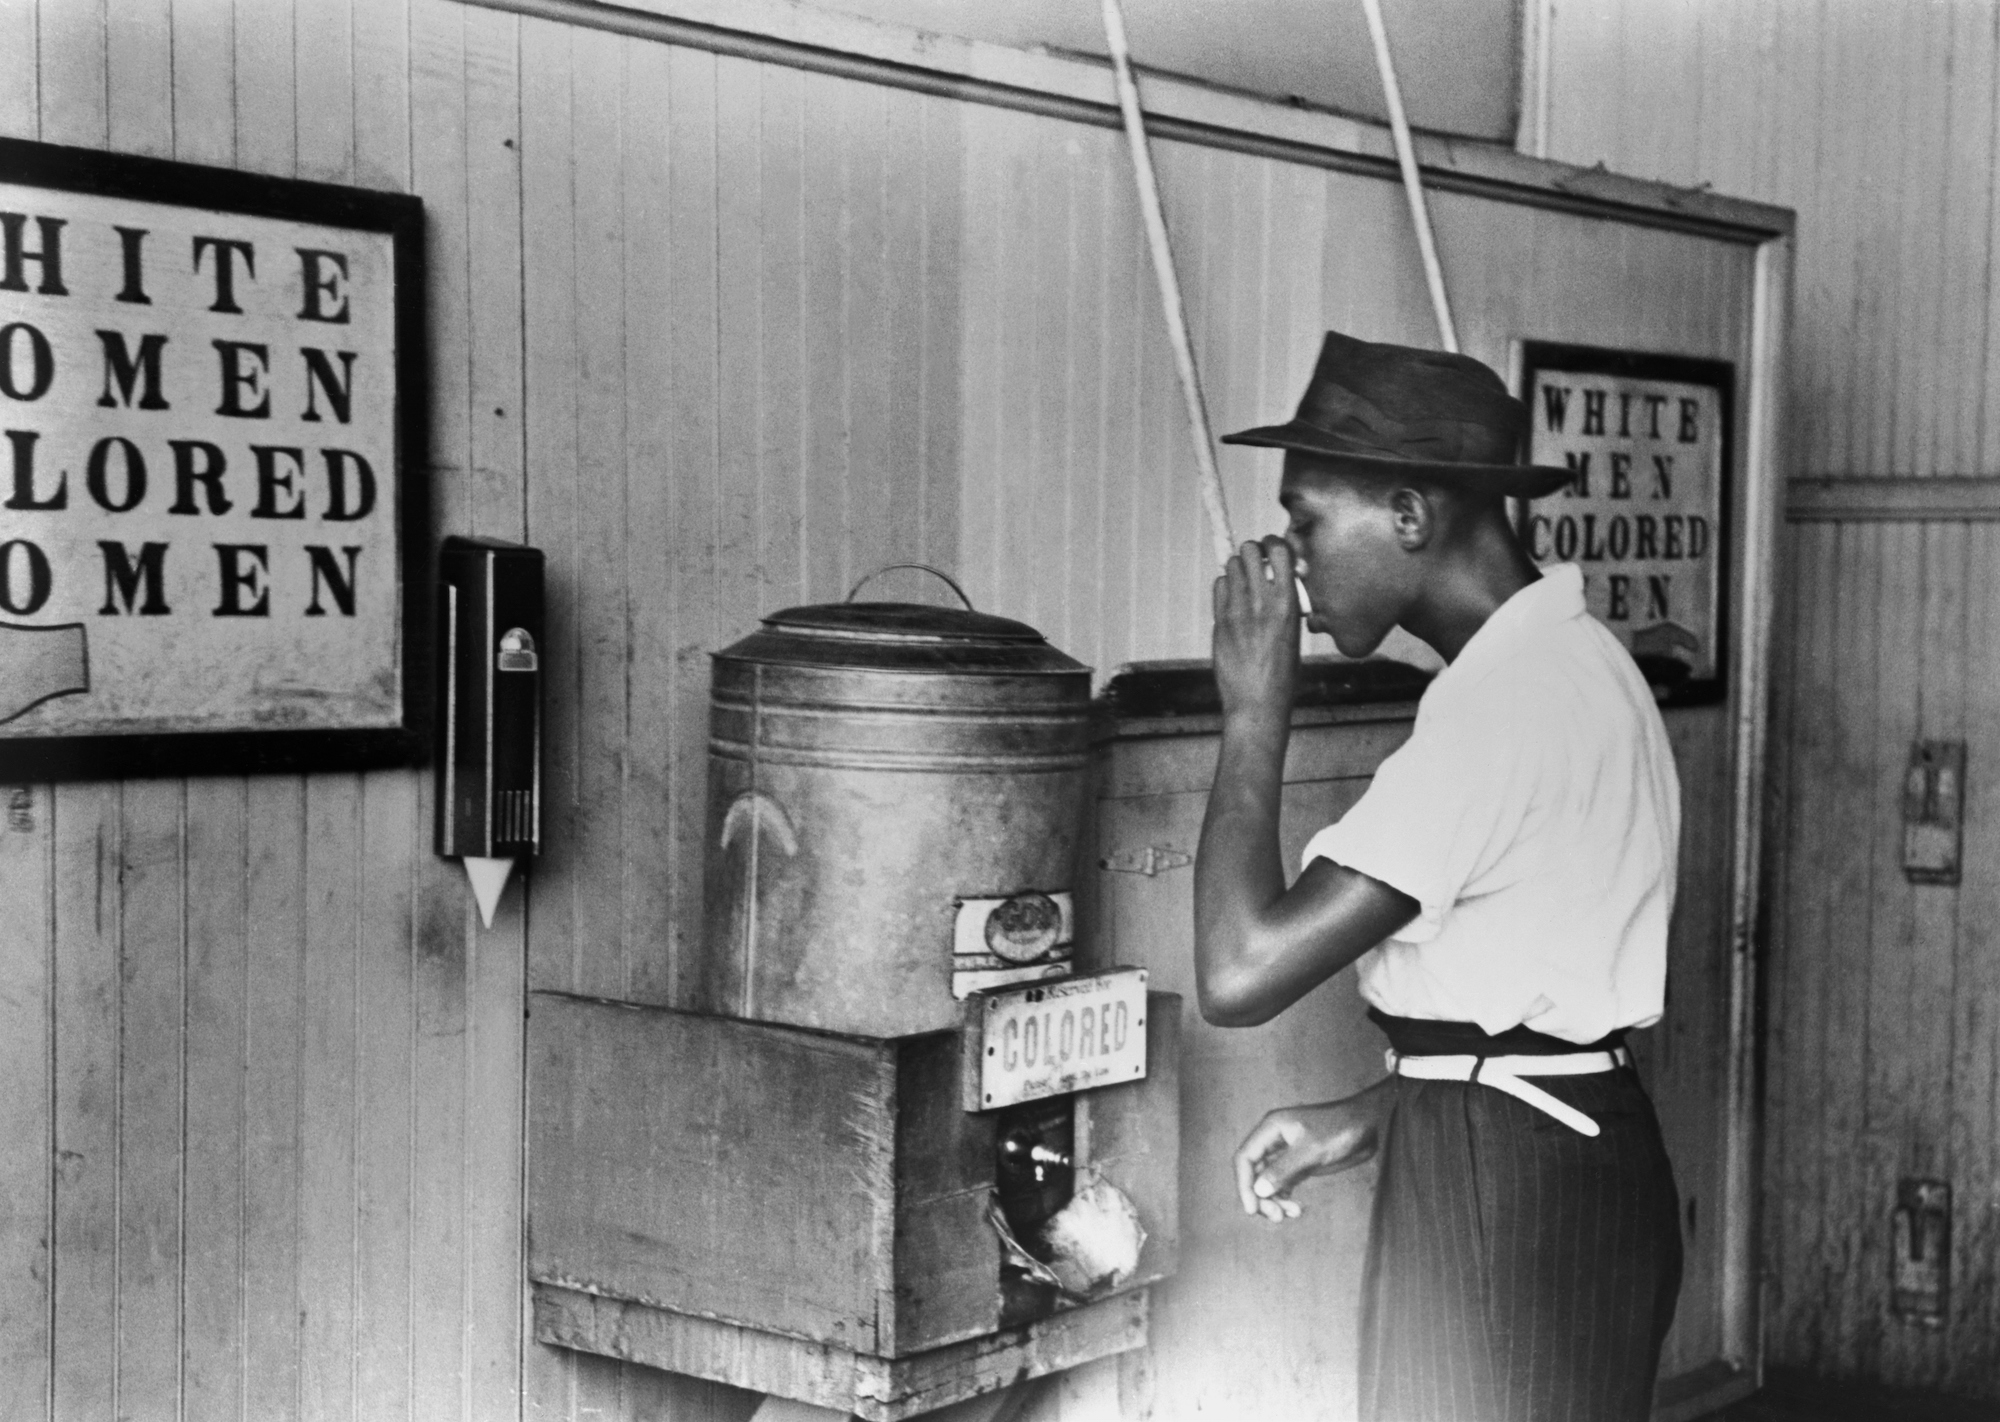 The Black Codes and Jim Crow Laws